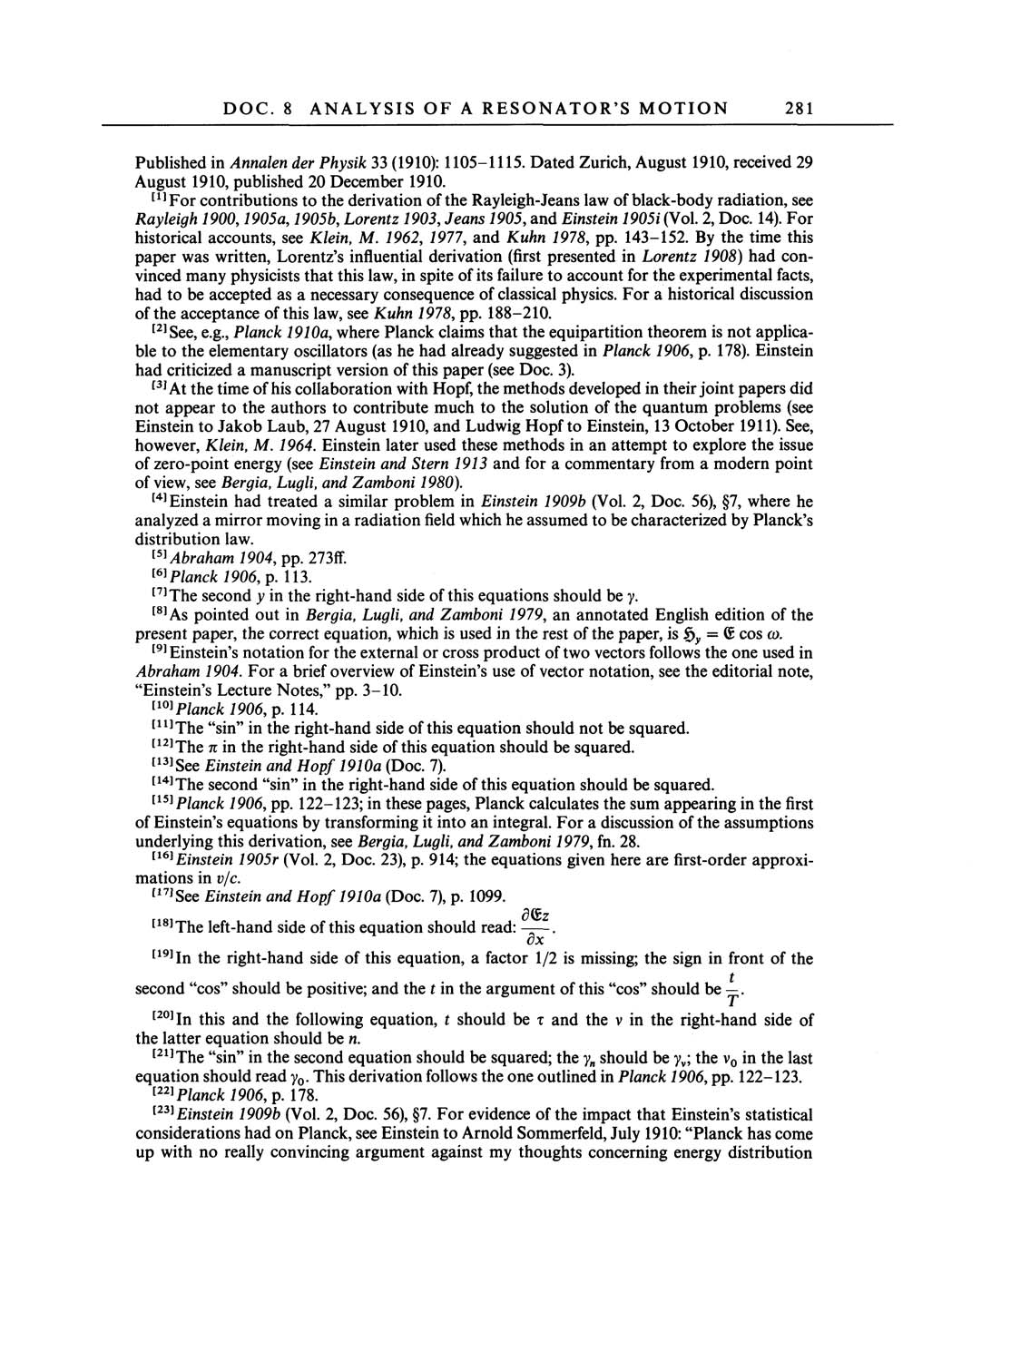 Volume 3: The Swiss Years: Writings 1909-1911 page 281